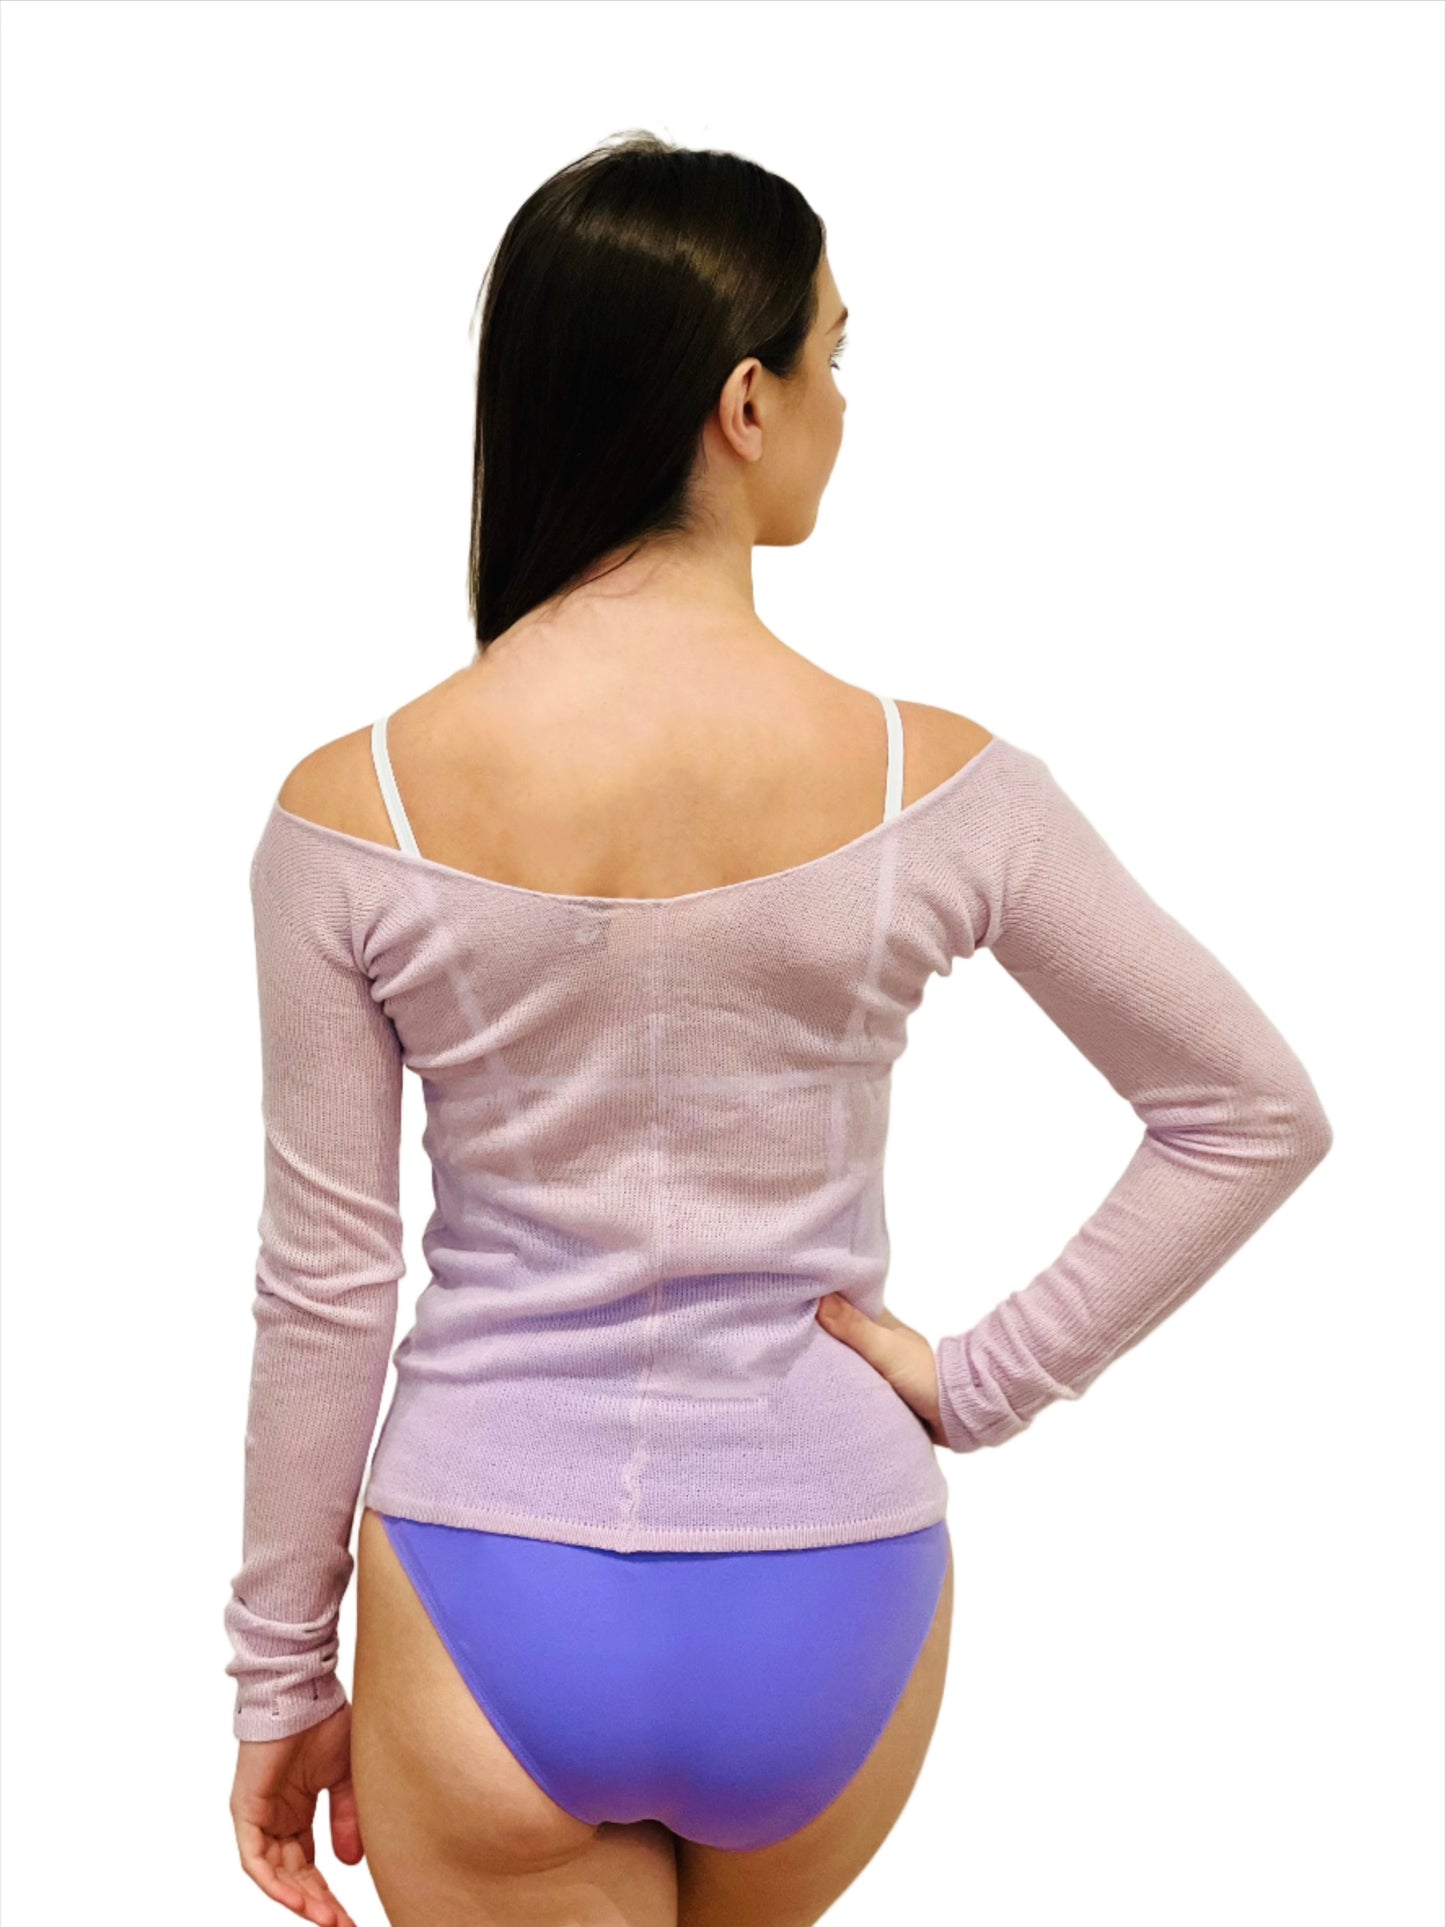 Fine knit warm up top from The Collective Dancewear